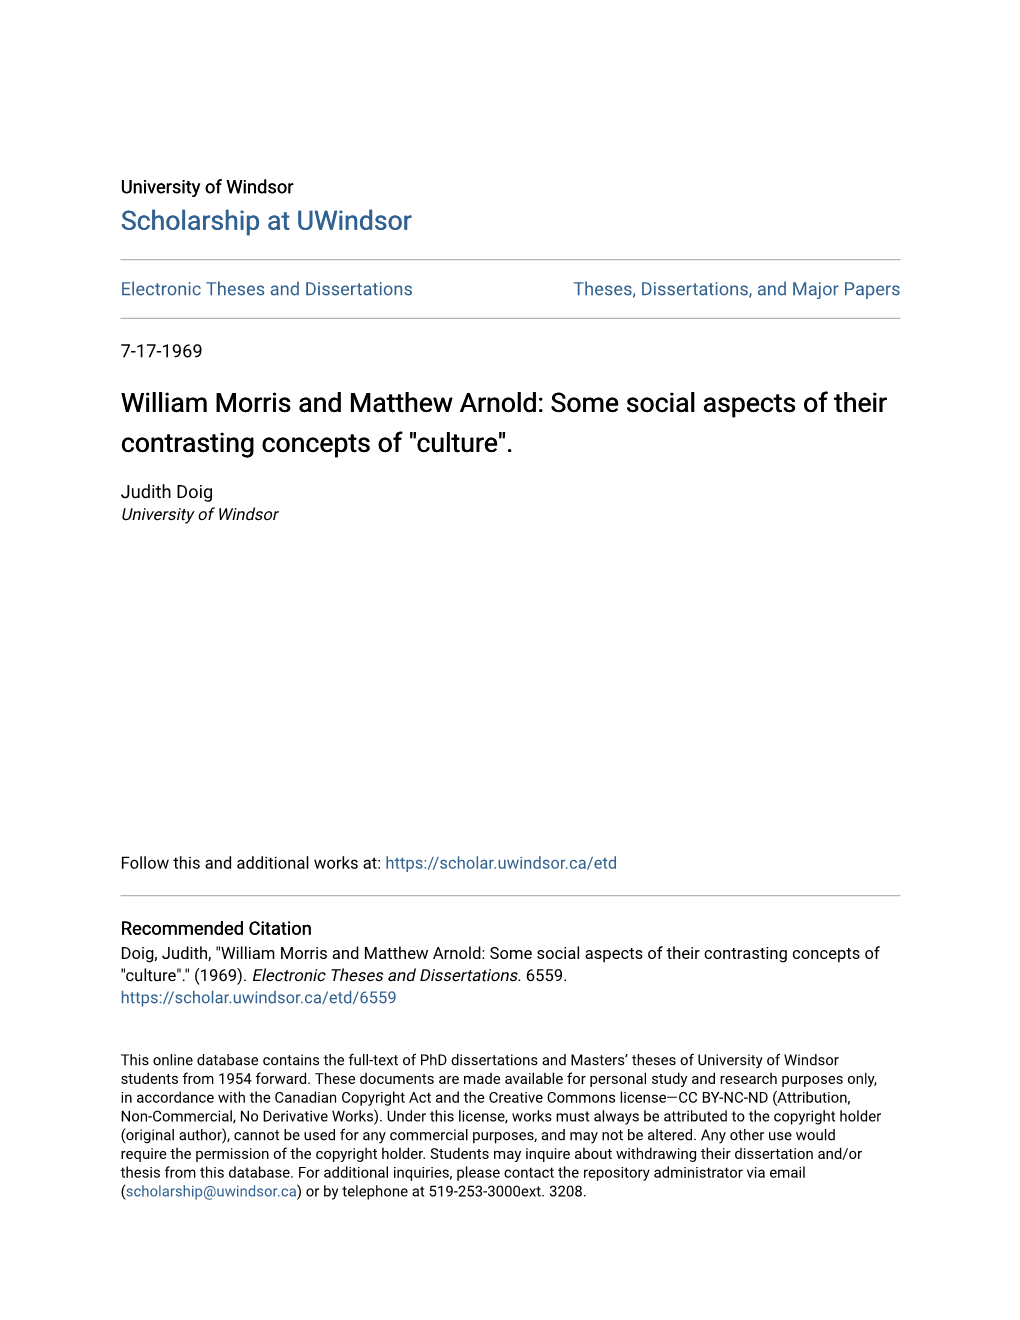 William Morris and Matthew Arnold: Some Social Aspects of Their Contrasting Concepts of "Culture"